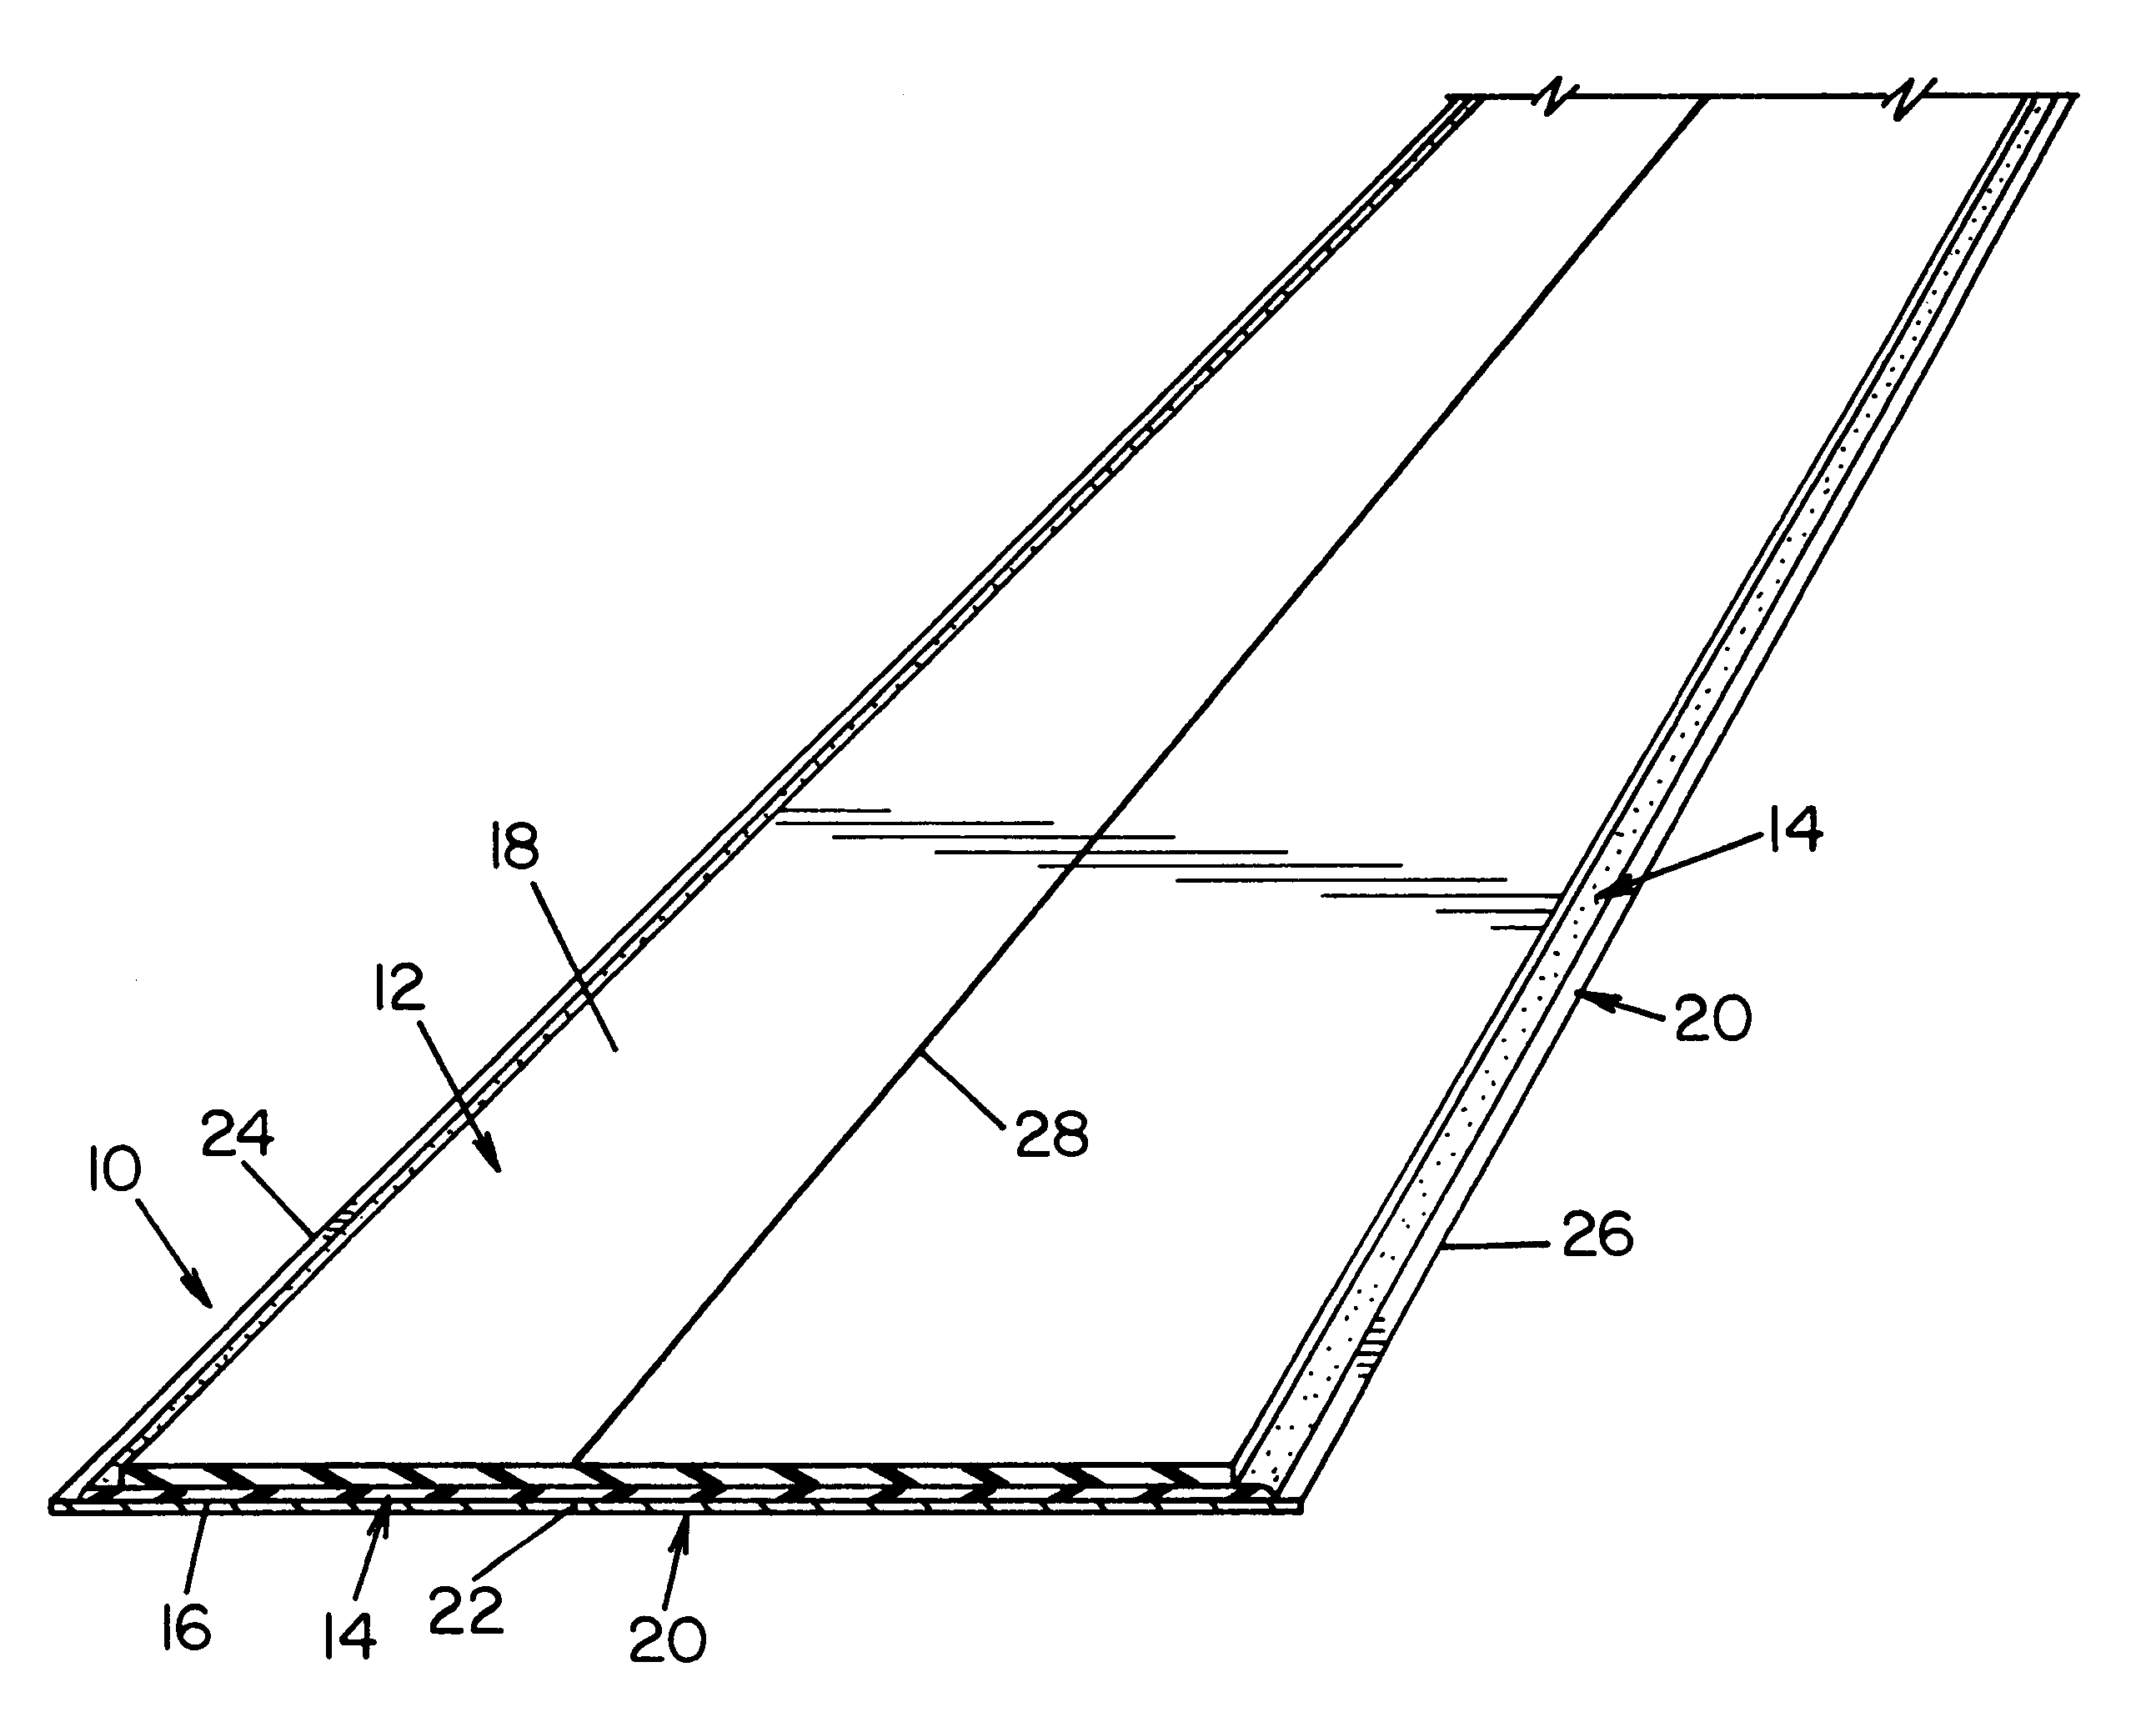 Adhesive rubber article having scored released liner and guide to facilitate field application and related methods